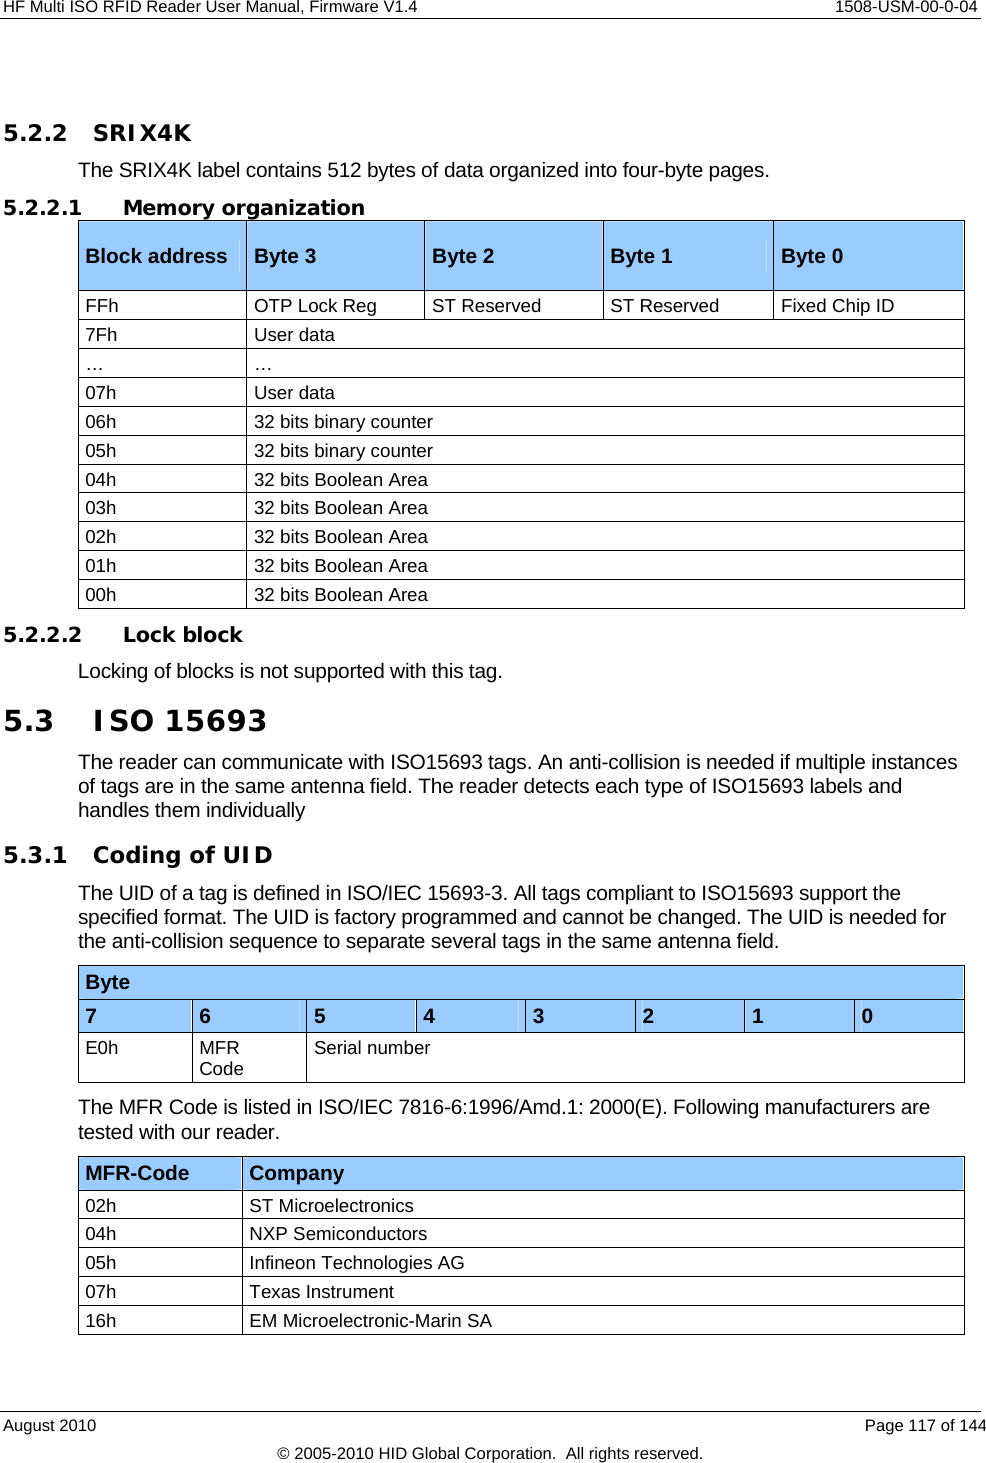  HF Multi ISO RFID Reader User Manual, Firmware V1.4    1508-USM-00-0-04  5.2.2 SRIX4K The SRIX4K label contains 512 bytes of data organized into four-byte pages. 5.2.2.1 Memory organization Block address  Byte 3   Byte 2  Byte 1  Byte 0 FFh  OTP Lock Reg  ST Reserved  ST Reserved  Fixed Chip ID 7Fh User data … … 07h User data 06h  32 bits binary counter 05h  32 bits binary counter 04h  32 bits Boolean Area 03h  32 bits Boolean Area 02h  32 bits Boolean Area 01h  32 bits Boolean Area 00h  32 bits Boolean Area 5.2.2.2 Lock block Locking of blocks is not supported with this tag. 5.3 ISO 15693 The reader can communicate with ISO15693 tags. An anti-collision is needed if multiple instances of tags are in the same antenna field. The reader detects each type of ISO15693 labels and handles them individually 5.3.1 Coding of UID The UID of a tag is defined in ISO/IEC 15693-3. All tags compliant to ISO15693 support the specified format. The UID is factory programmed and cannot be changed. The UID is needed for the anti-collision sequence to separate several tags in the same antenna field. Byte 7  6  4  3  2 5  1  0 E0h MFR Code  Serial number The MFR Code is listed in ISO/IEC 7816-6:1996/Amd.1: 2000(E). Following manufacturers are tested with our reader. MFR-Code  Company 02h ST Microelectronics 04h NXP Semiconductors 05h  Infineon Technologies AG 07h Texas Instrument 16h  EM Microelectronic-Marin SA August 2010    Page 117 of 144 © 2005-2010 HID Global Corporation.  All rights reserved. 